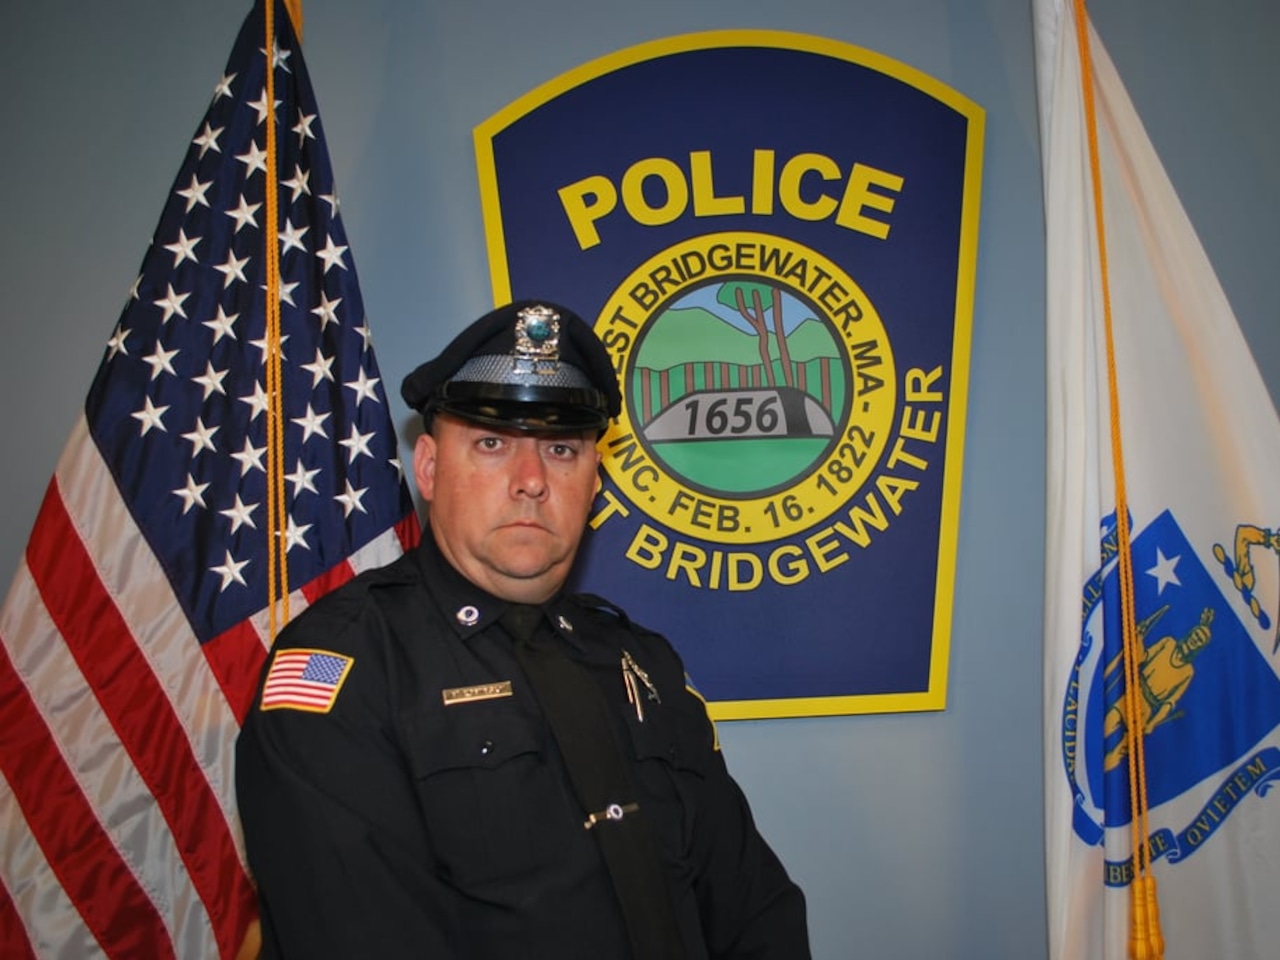 West Bridgewater police officer remembered as avid hunter and fisherman [Video]